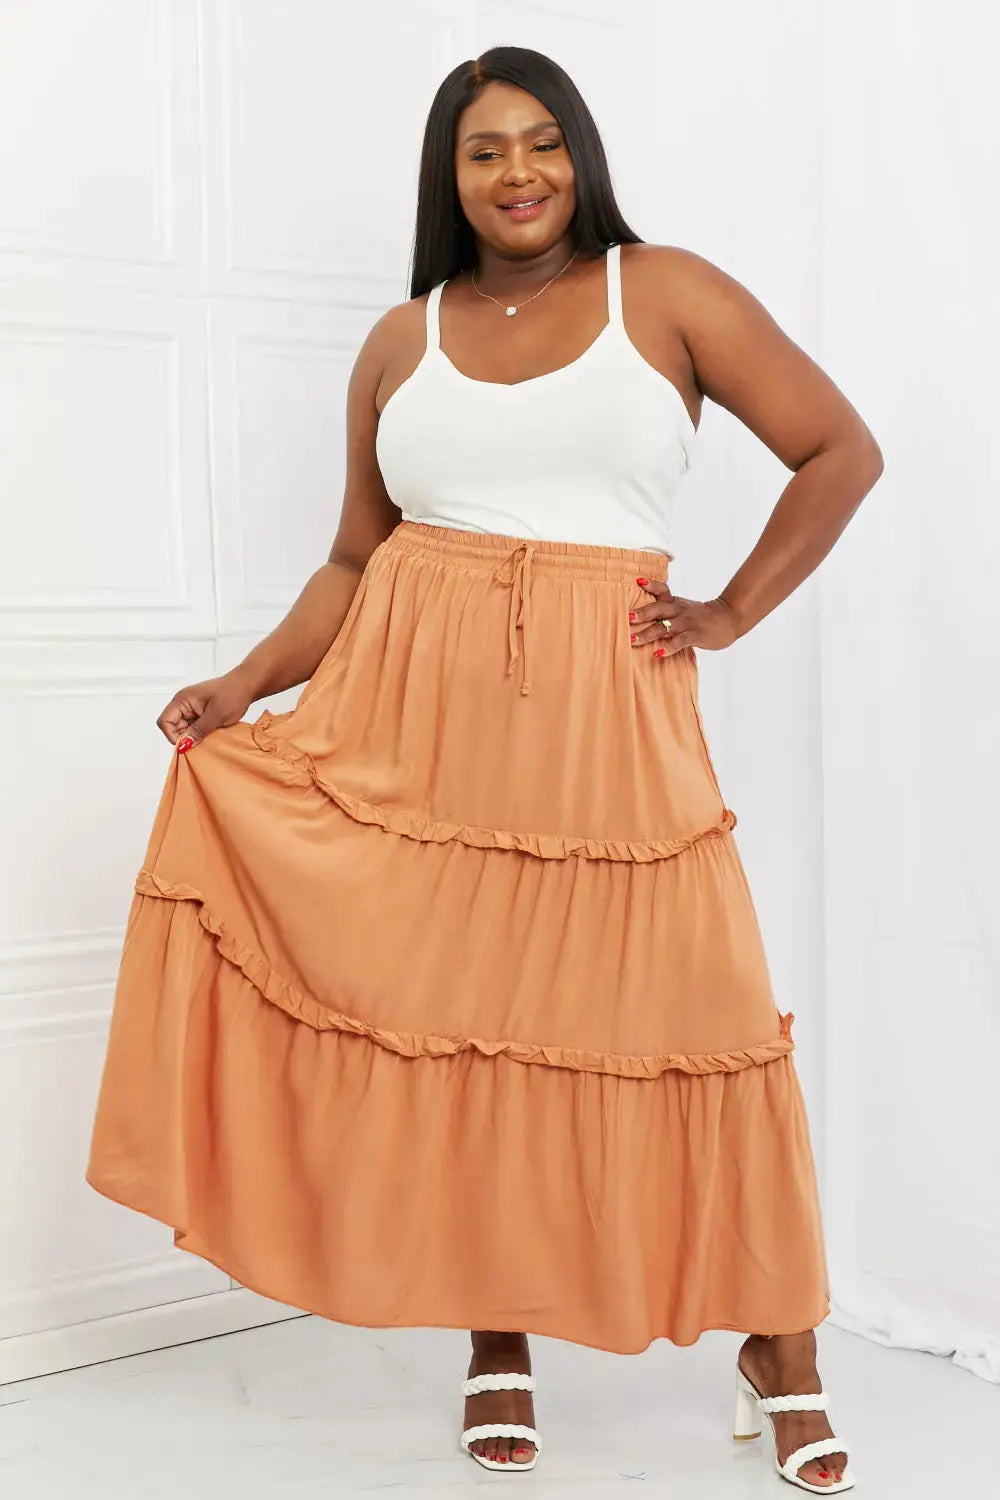 Summer Days Ruffled Maxi Skirt in Butter Orange  Southern Soul Collectives